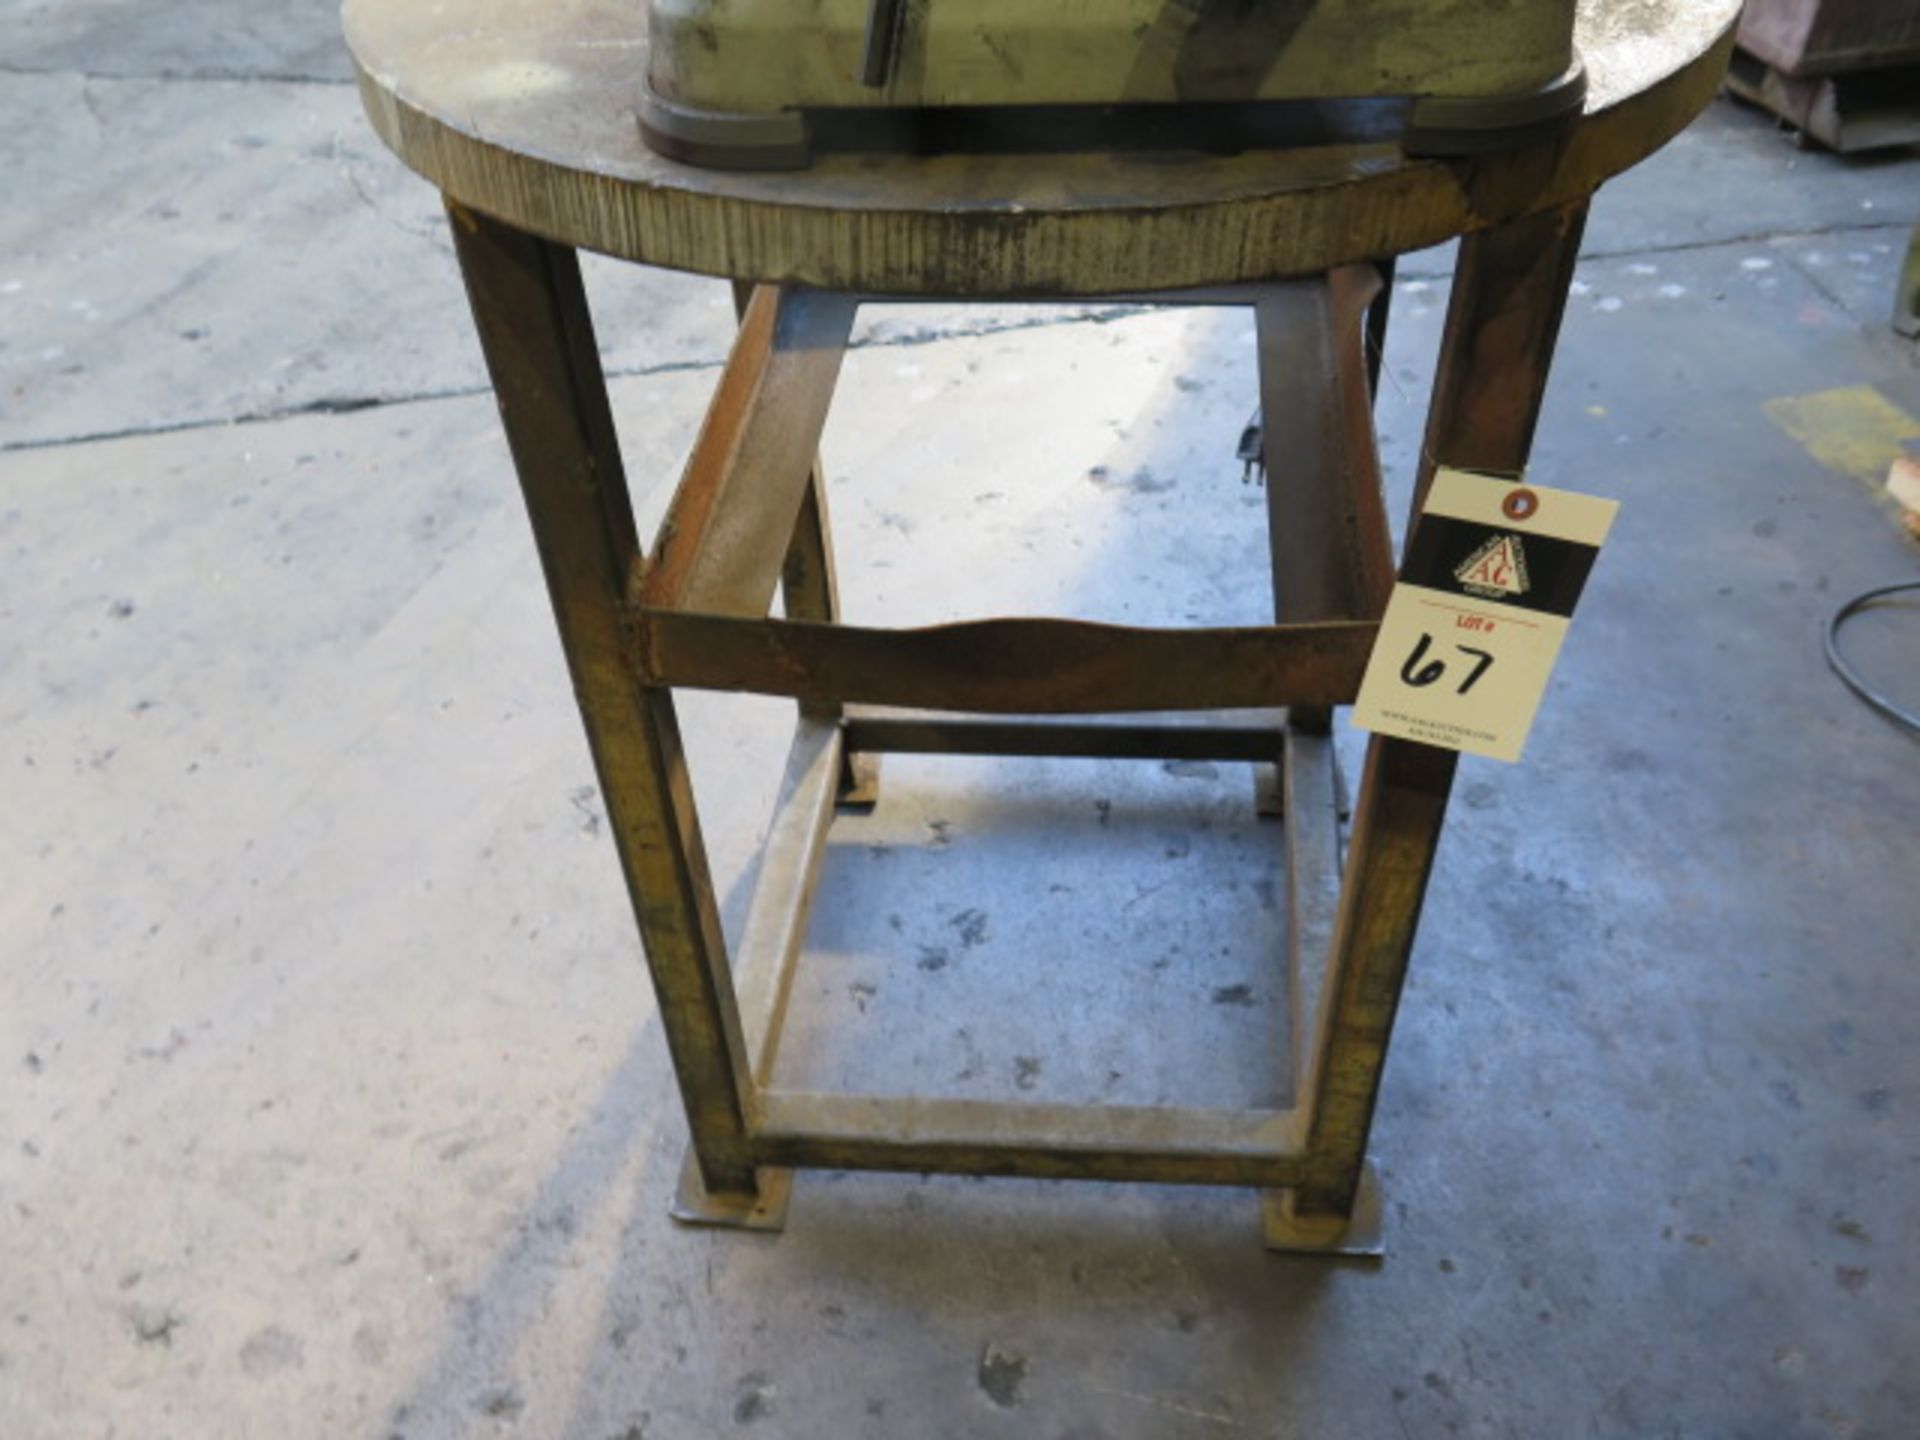 24" Dia. X 1 1/4" Steel Table (SOLD AS-IS - NO WARRANTY)